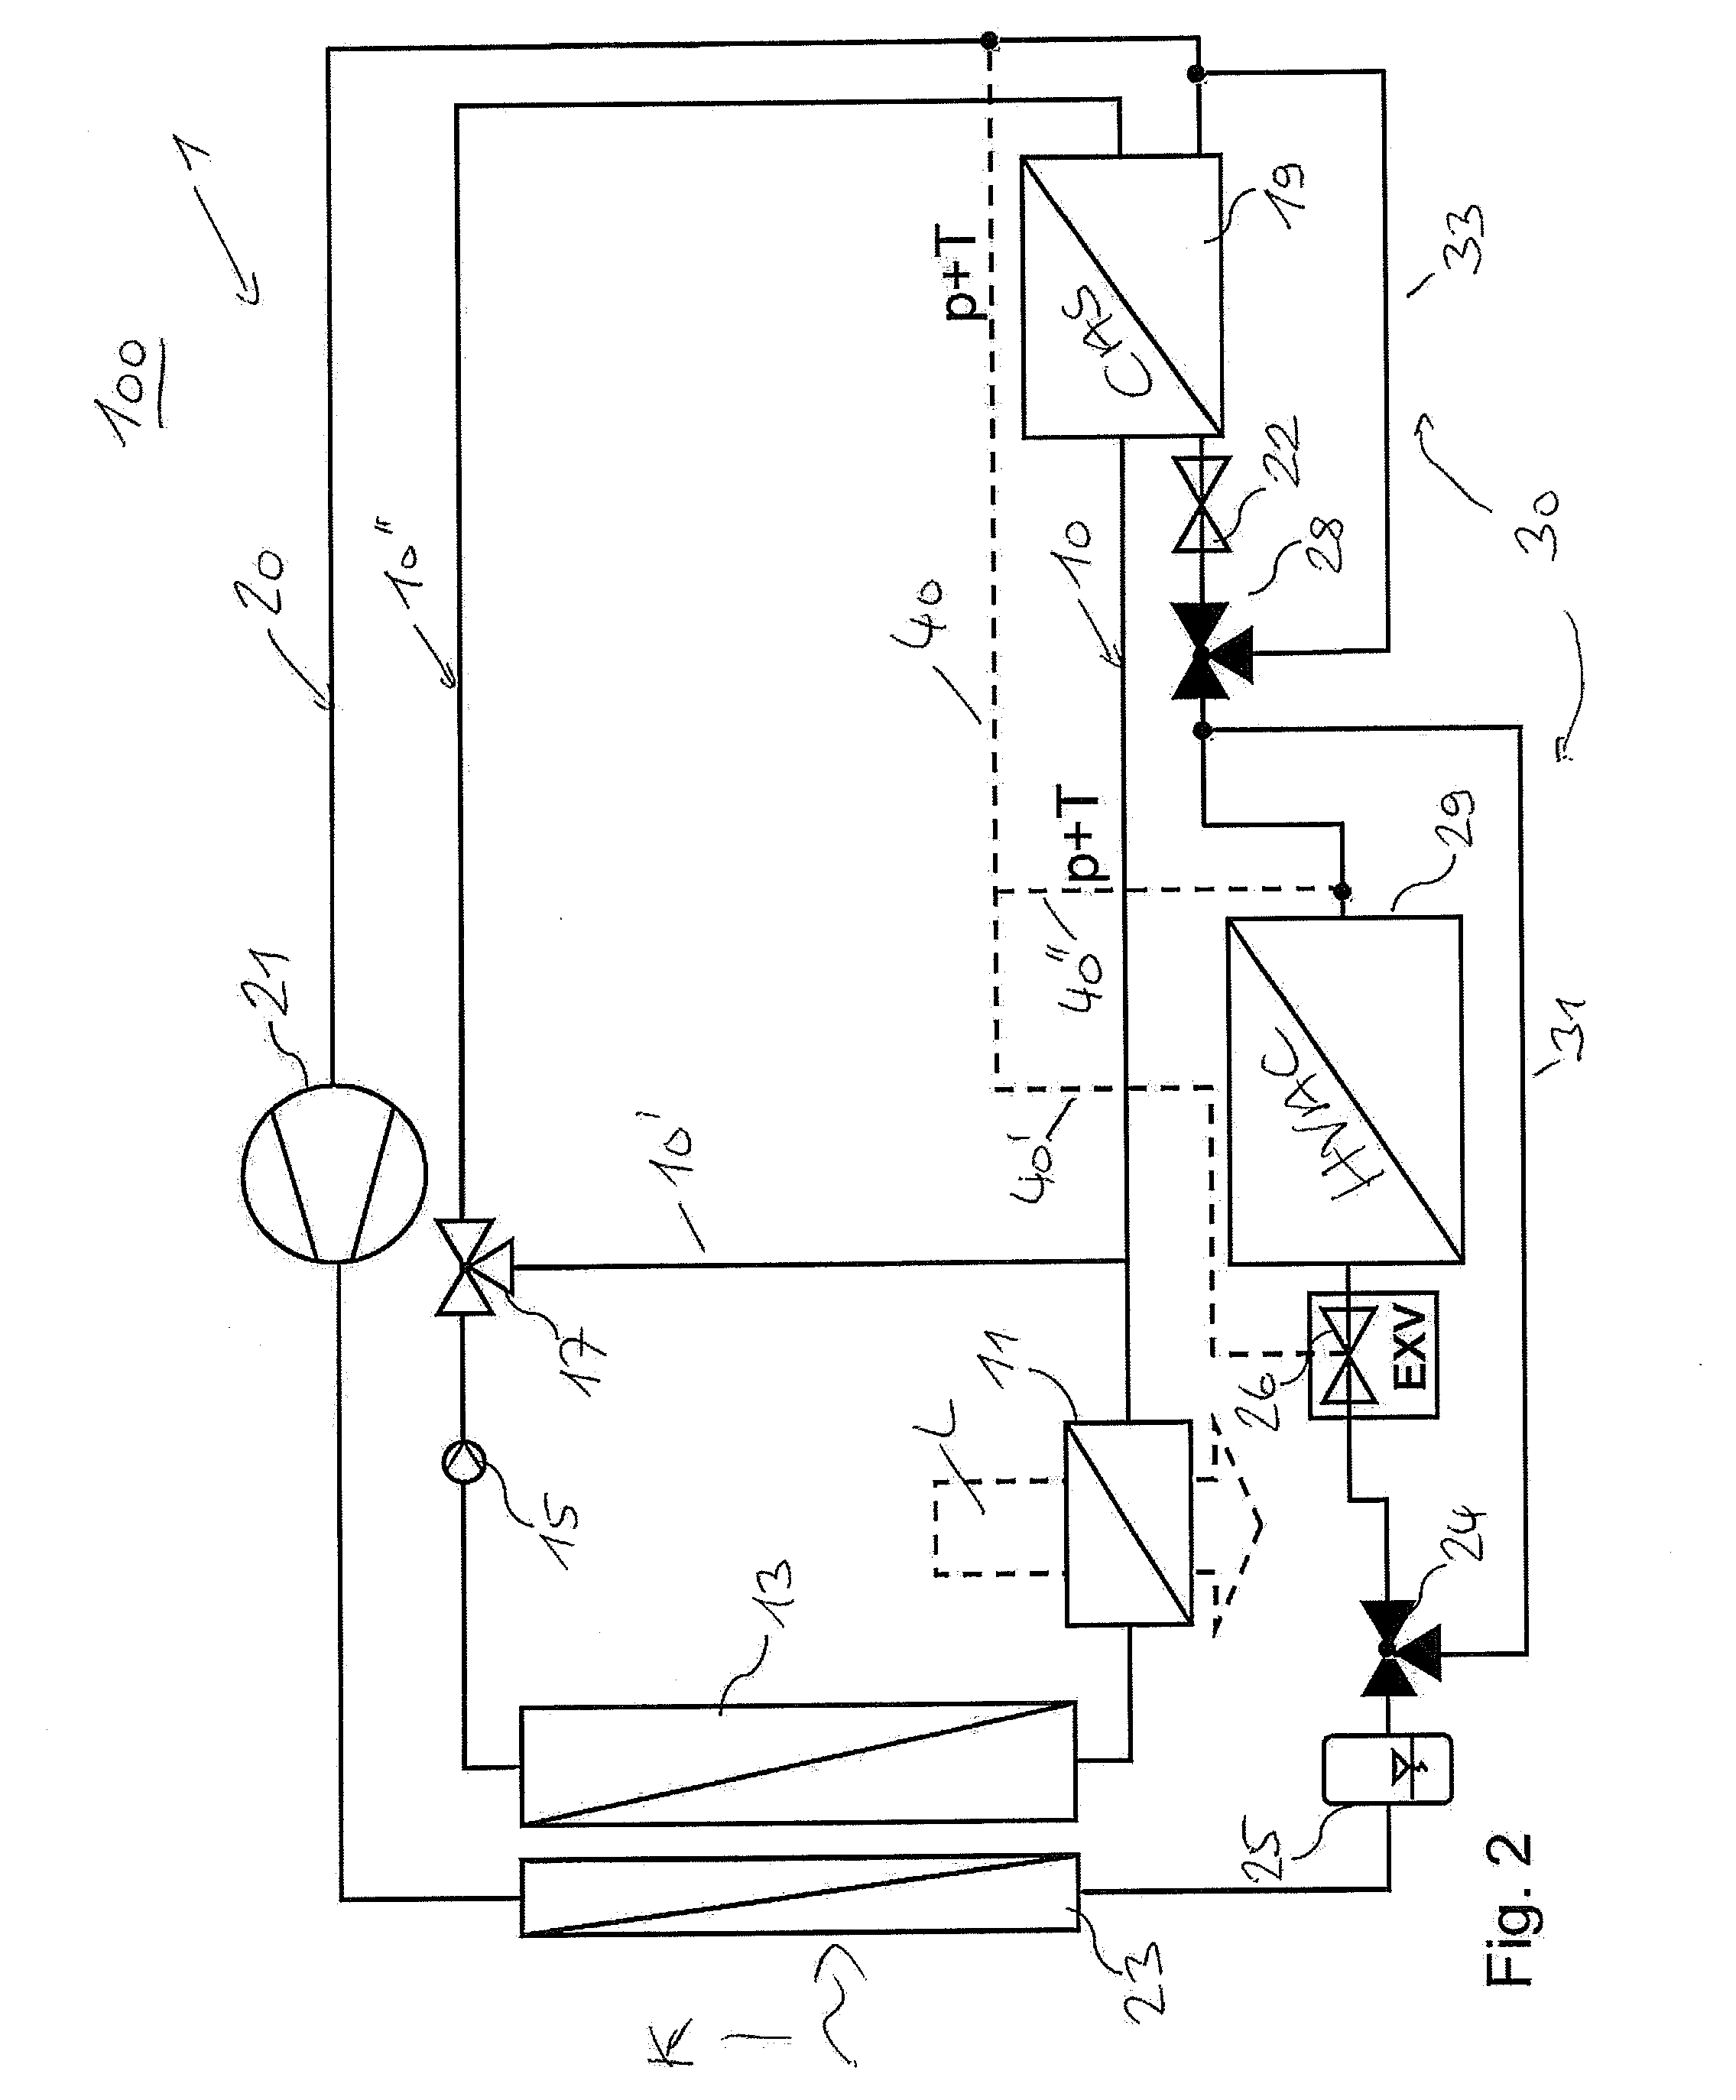 Device for cooling a coolant, circuit for charging an internal combustion engine, and method for cooling a substantially gaseous charging fluid for charging an internal combustion engine